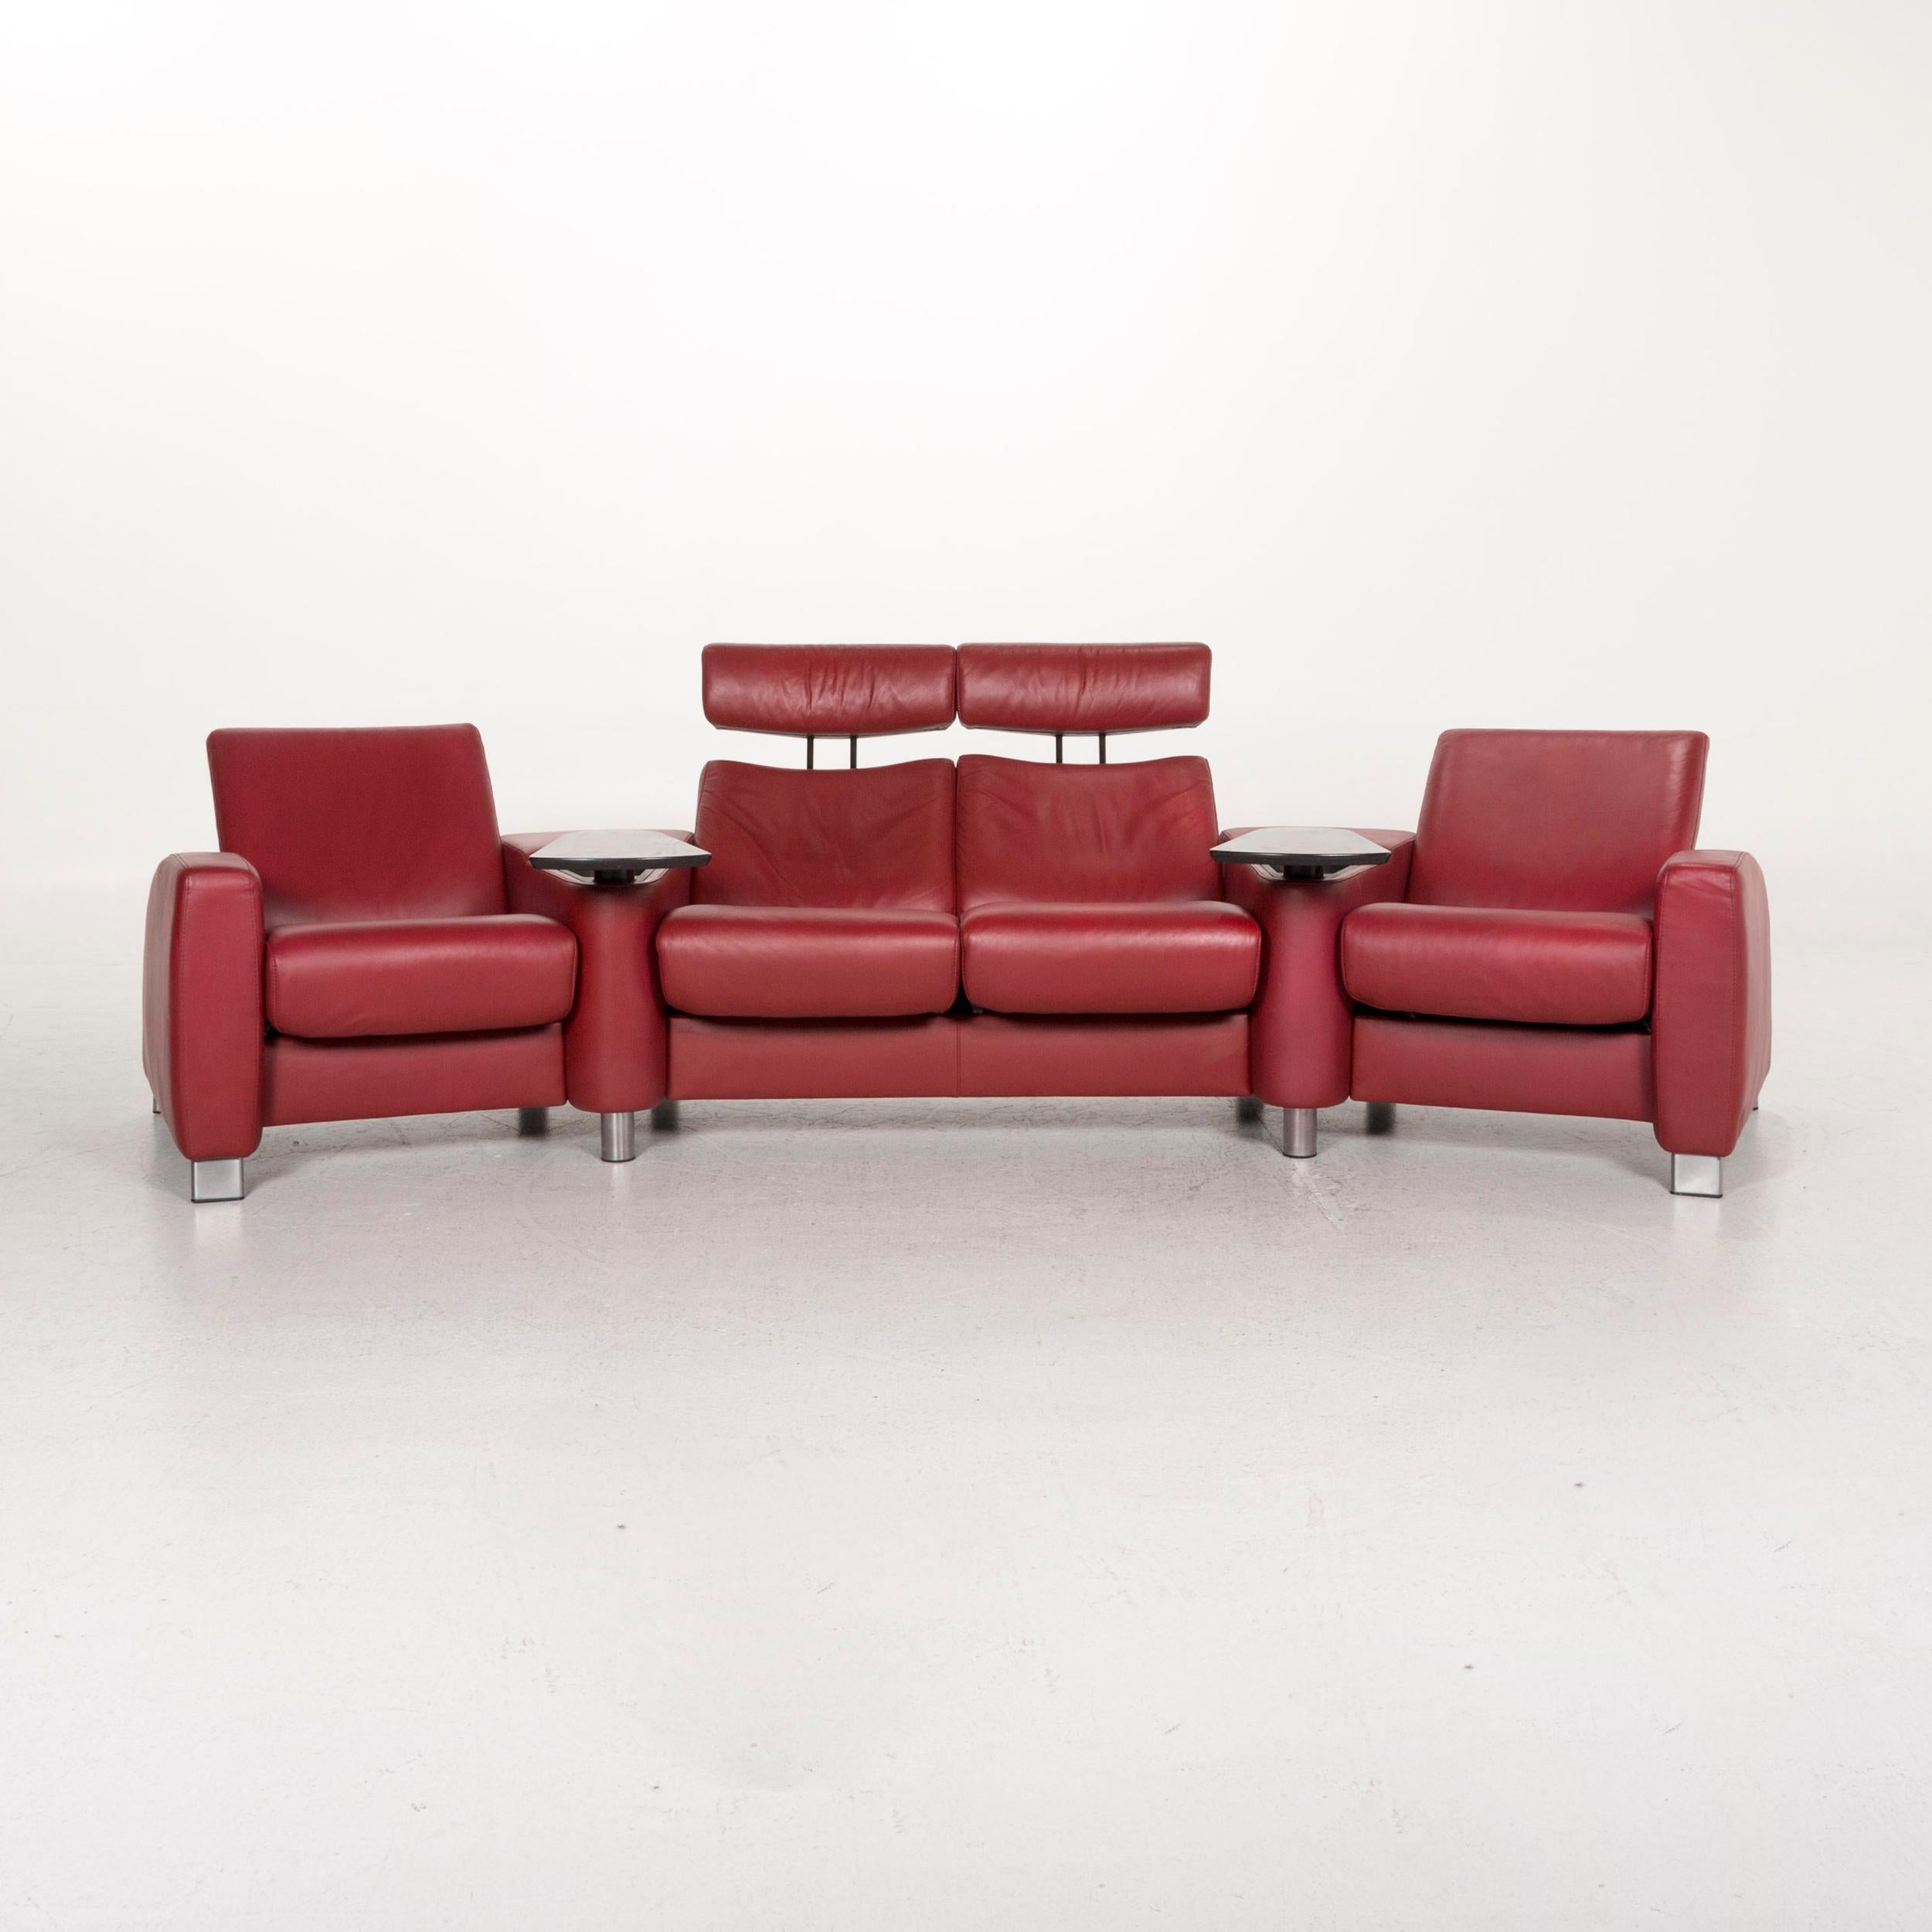 We bring to you a Stressless Arion leather sofa red four-seat function home theater.


 Product measurements in centimeters:
 

Depth 112
Width 333
Height 85
Seat-height 45
Rest-height 60
Seat-depth 50
Seat-width 55
Back-height 45.
  